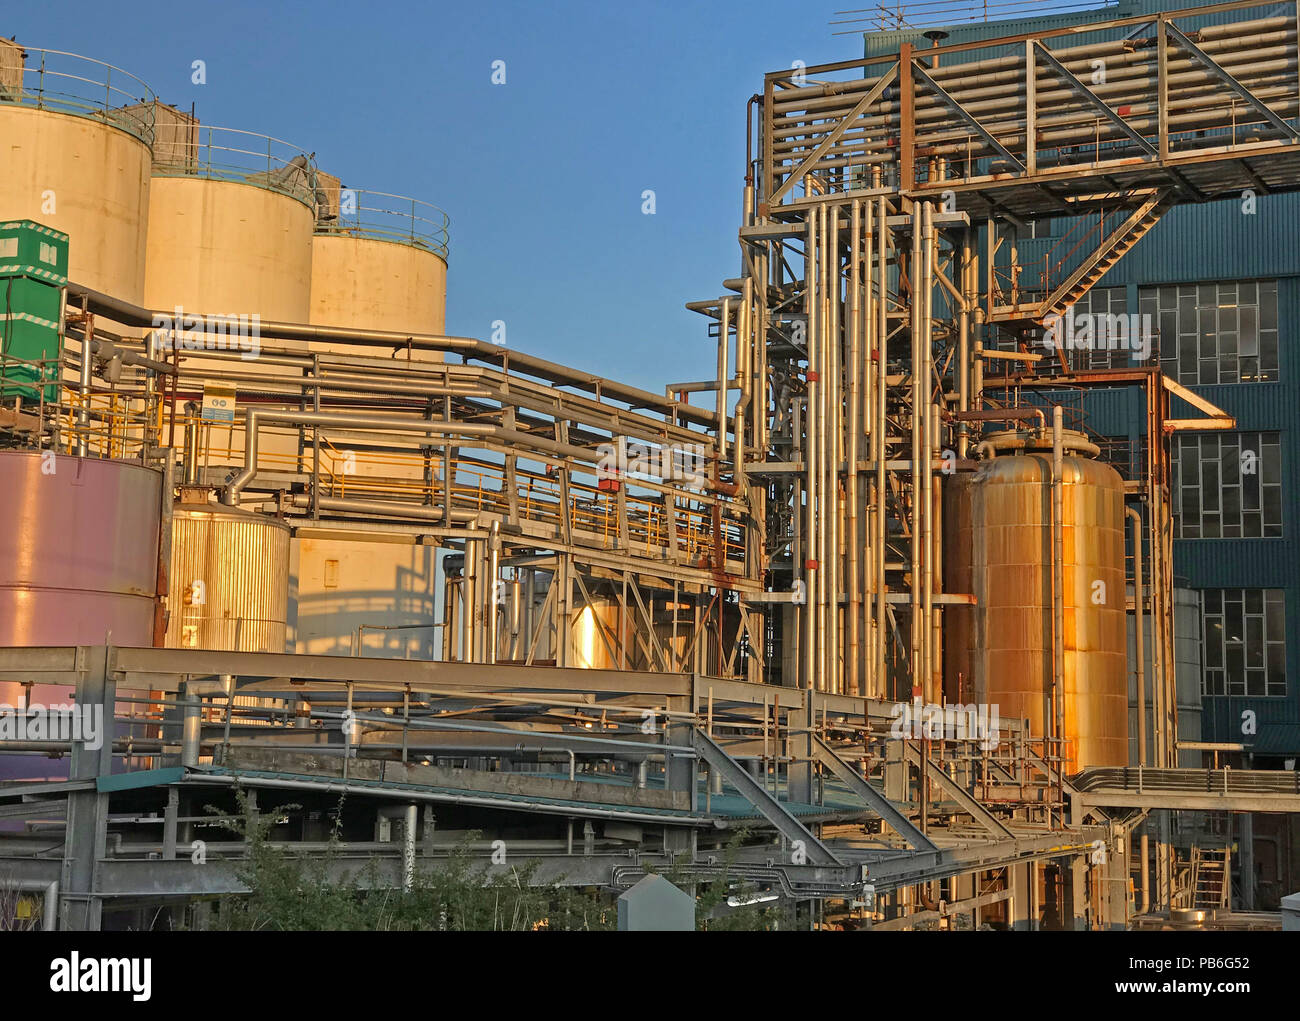 Chemical factory pipework, Lever Brothers Ltd, Persil soap powder, Warrington Bank Quay, Cheshire, North West England, UK Stock Photo